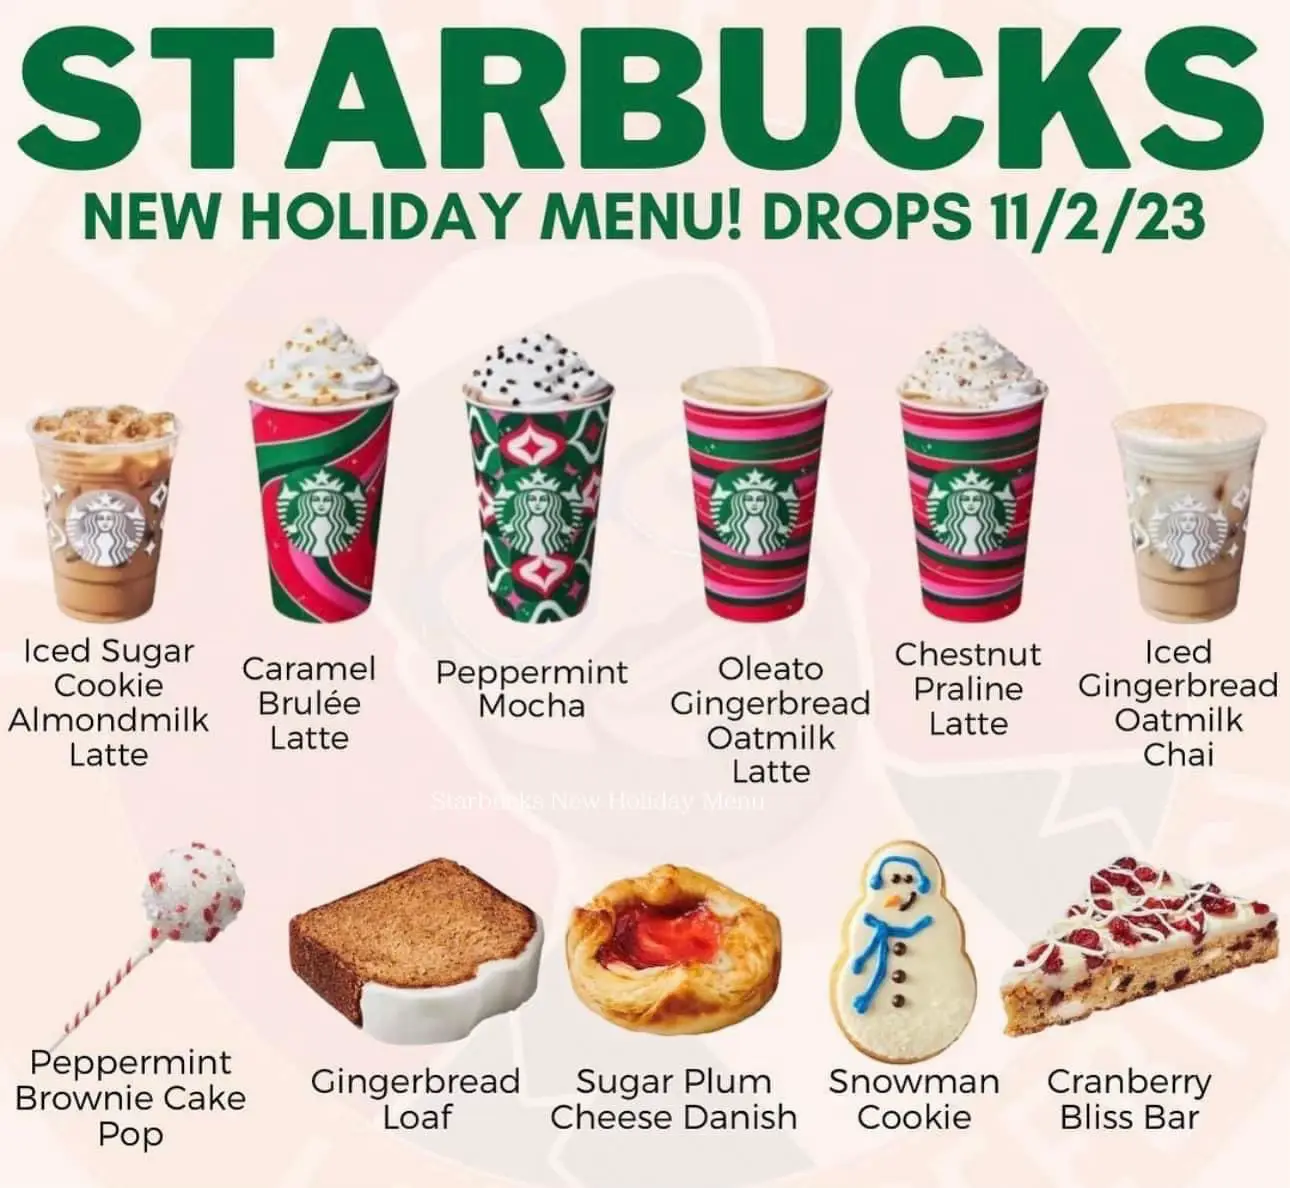 It's Official: My Favorite Starbucks Holiday Drink Is Off the Menu This Year